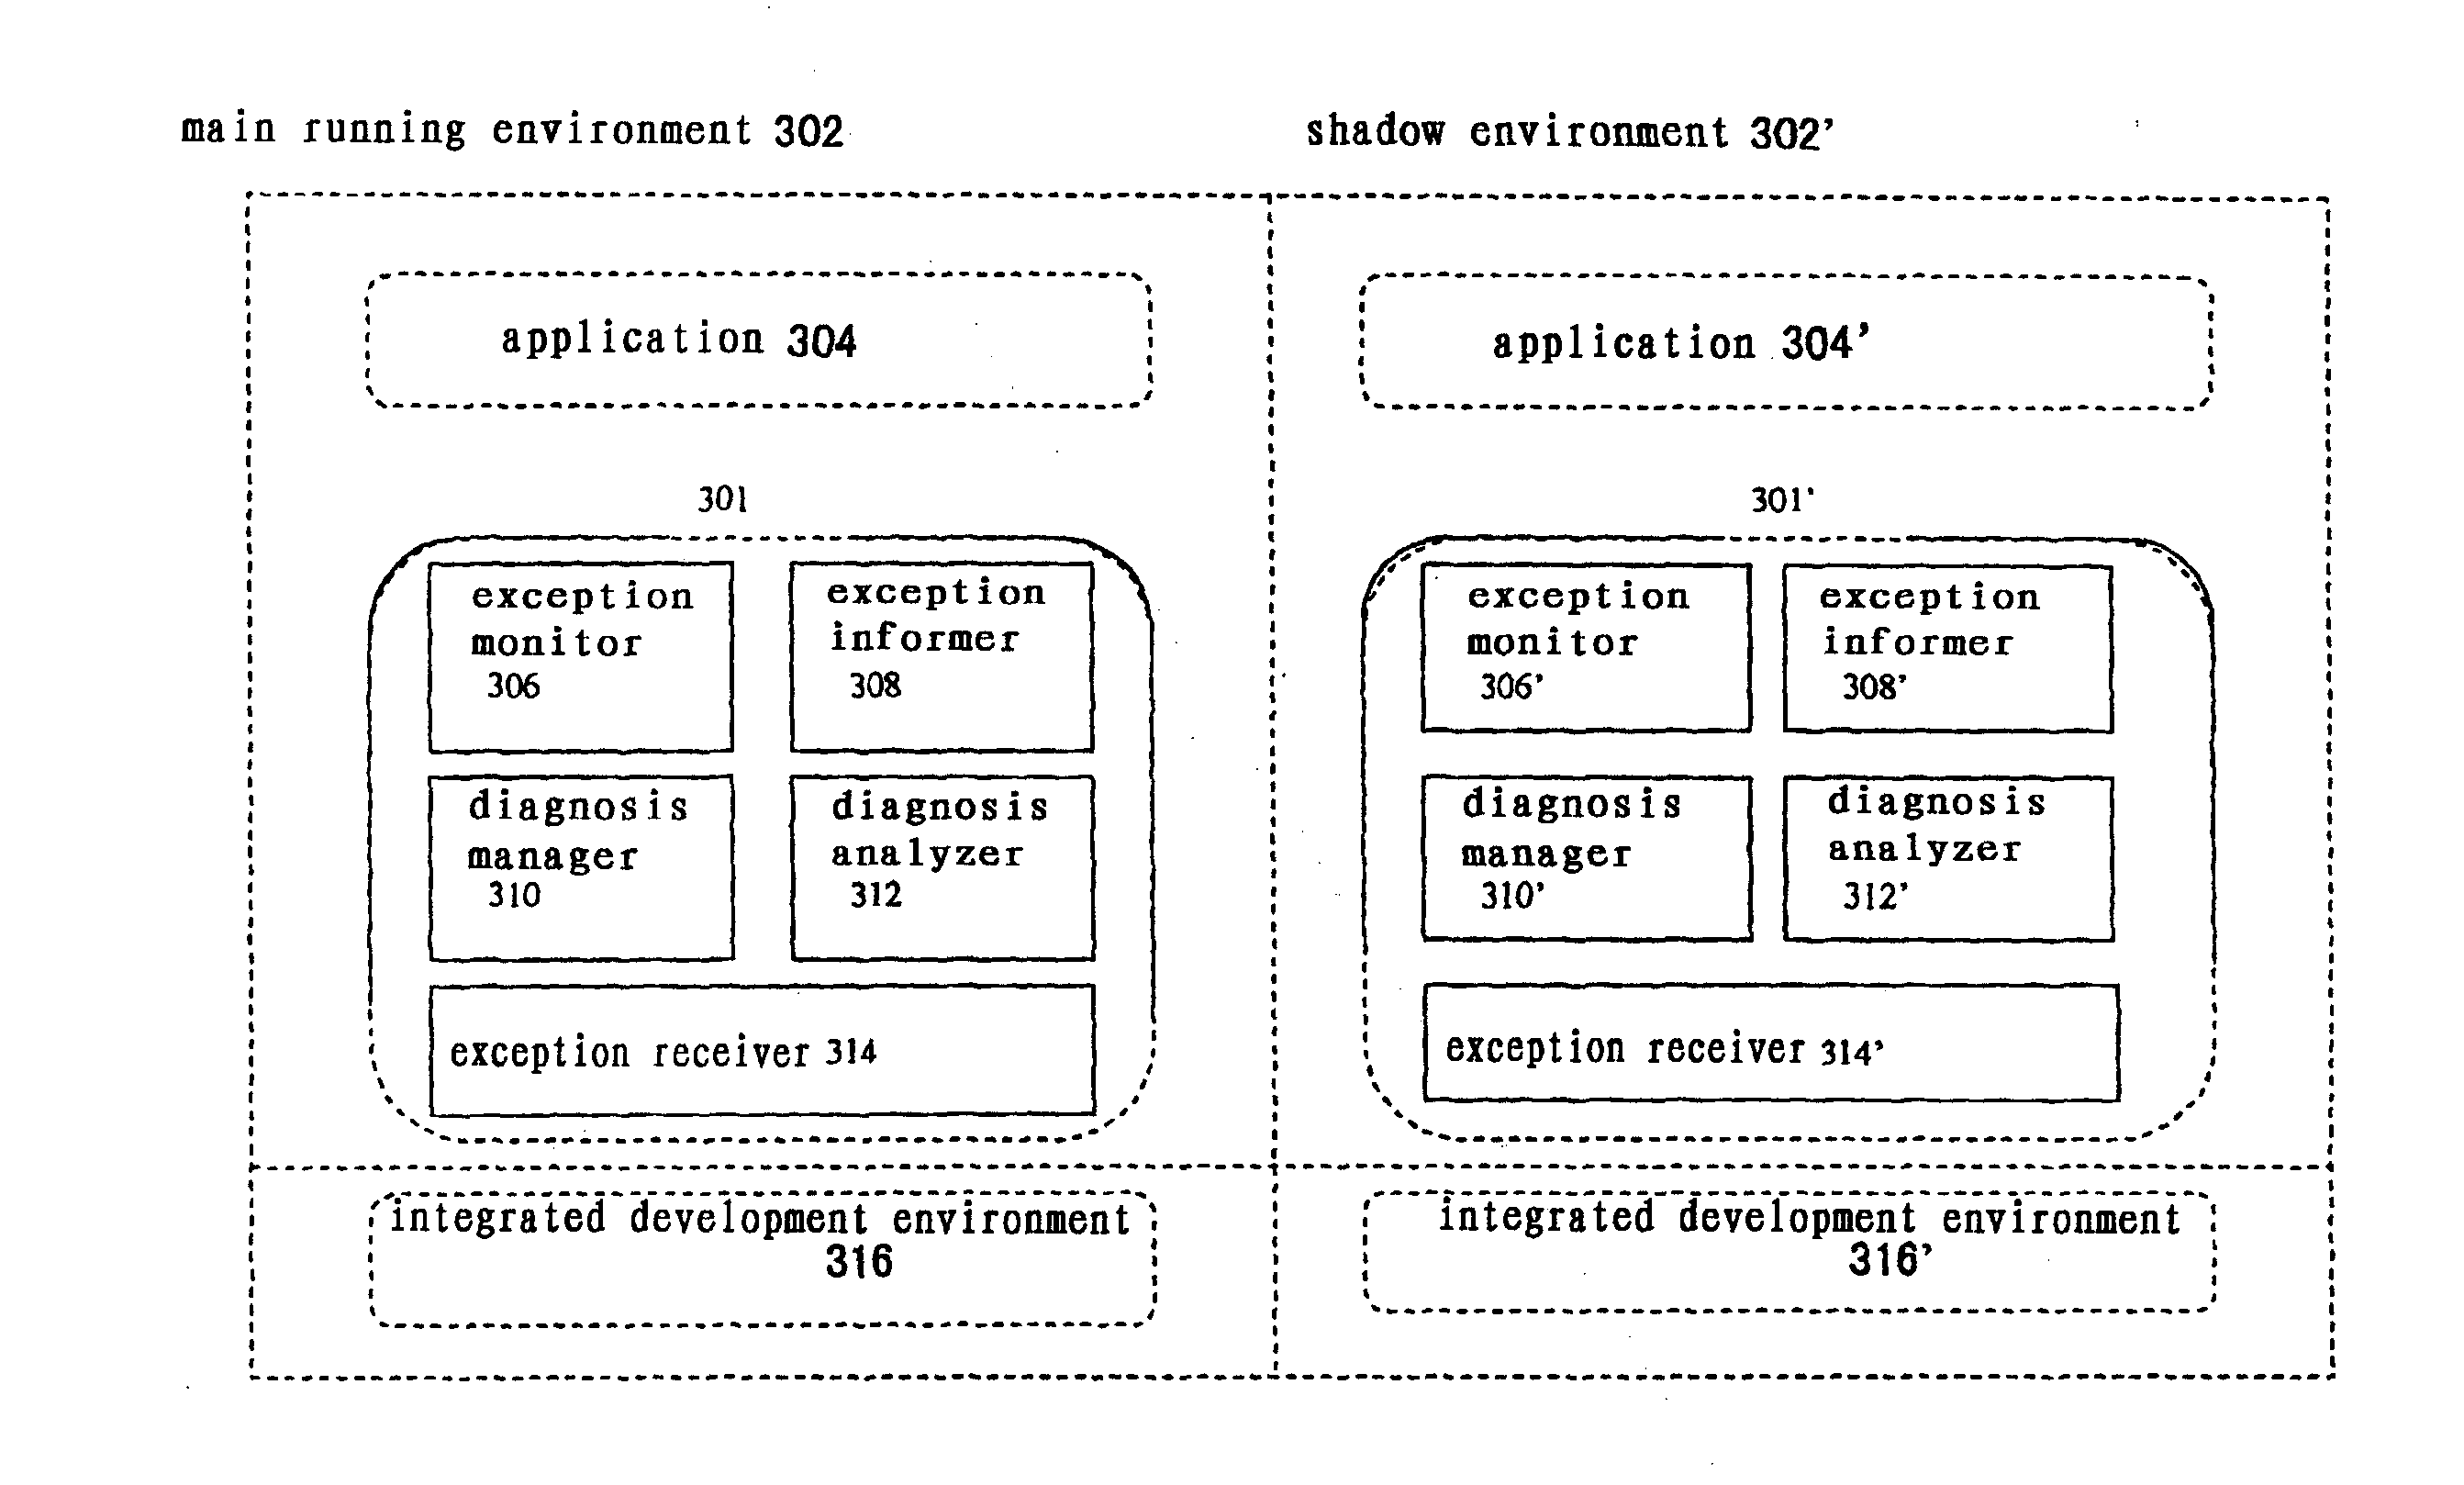 Method and System for Diagnosing an Application